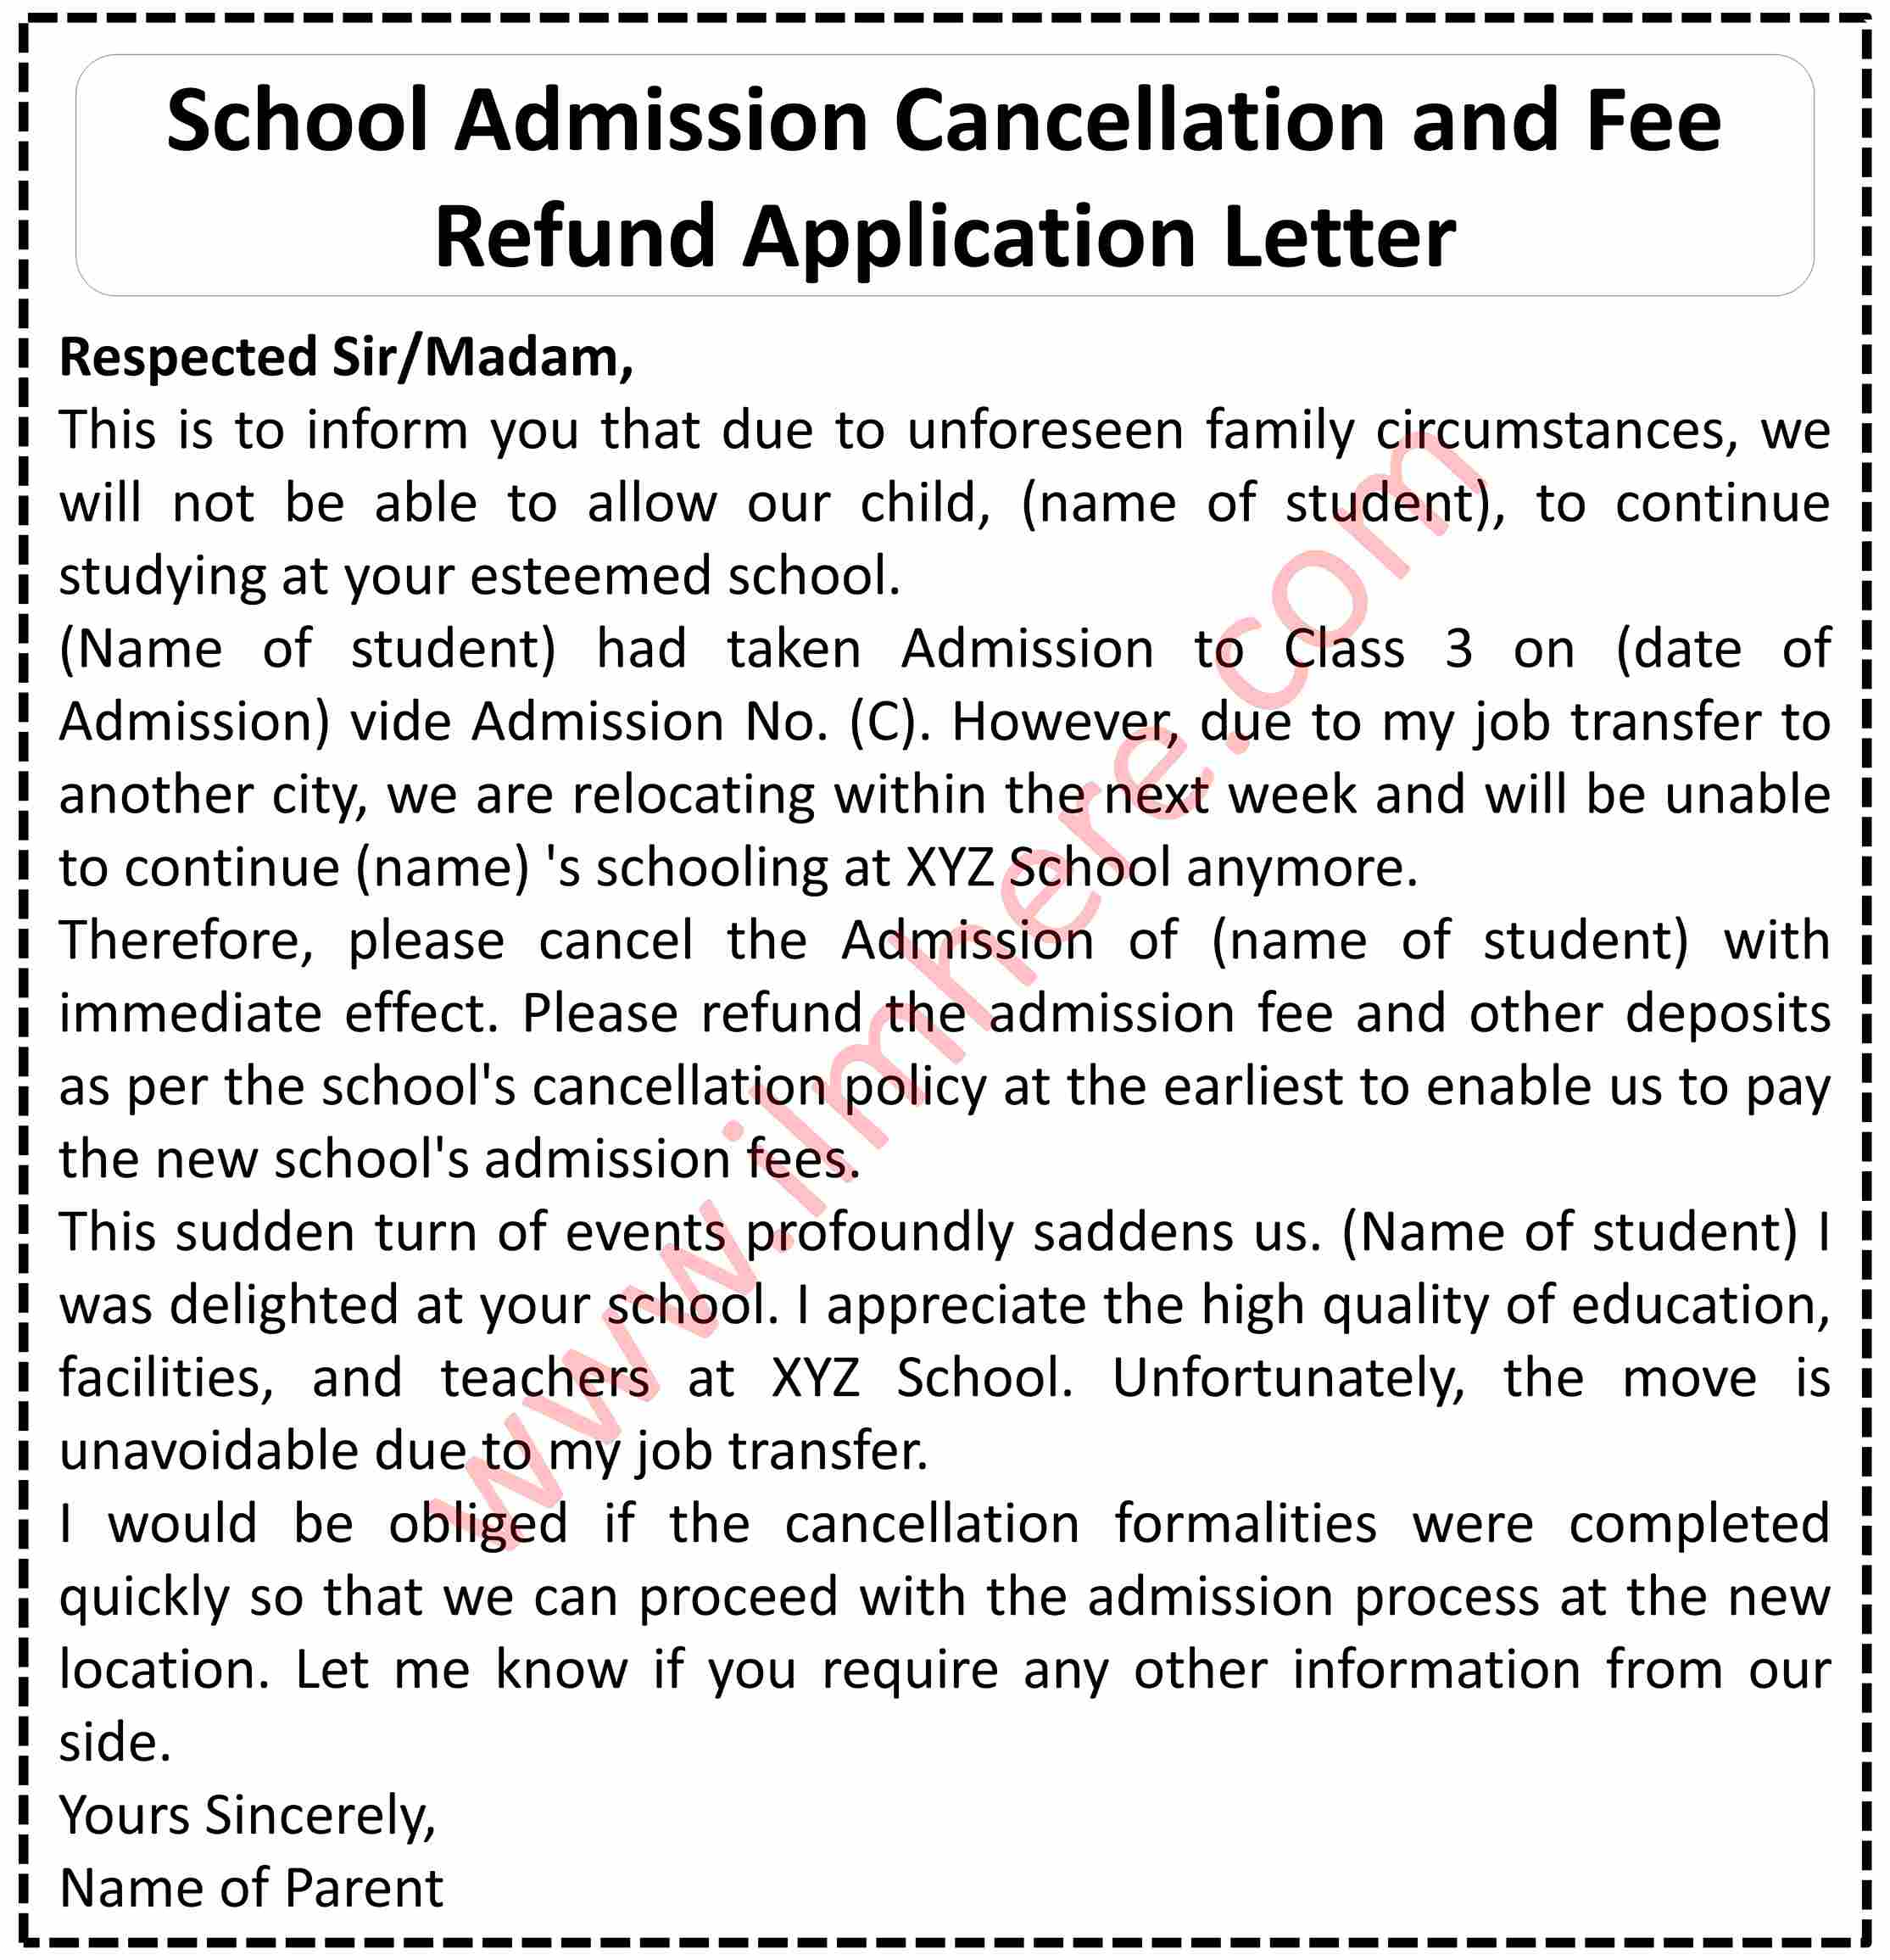 School Admission Cancellation and Fee Refund Application Letter-2